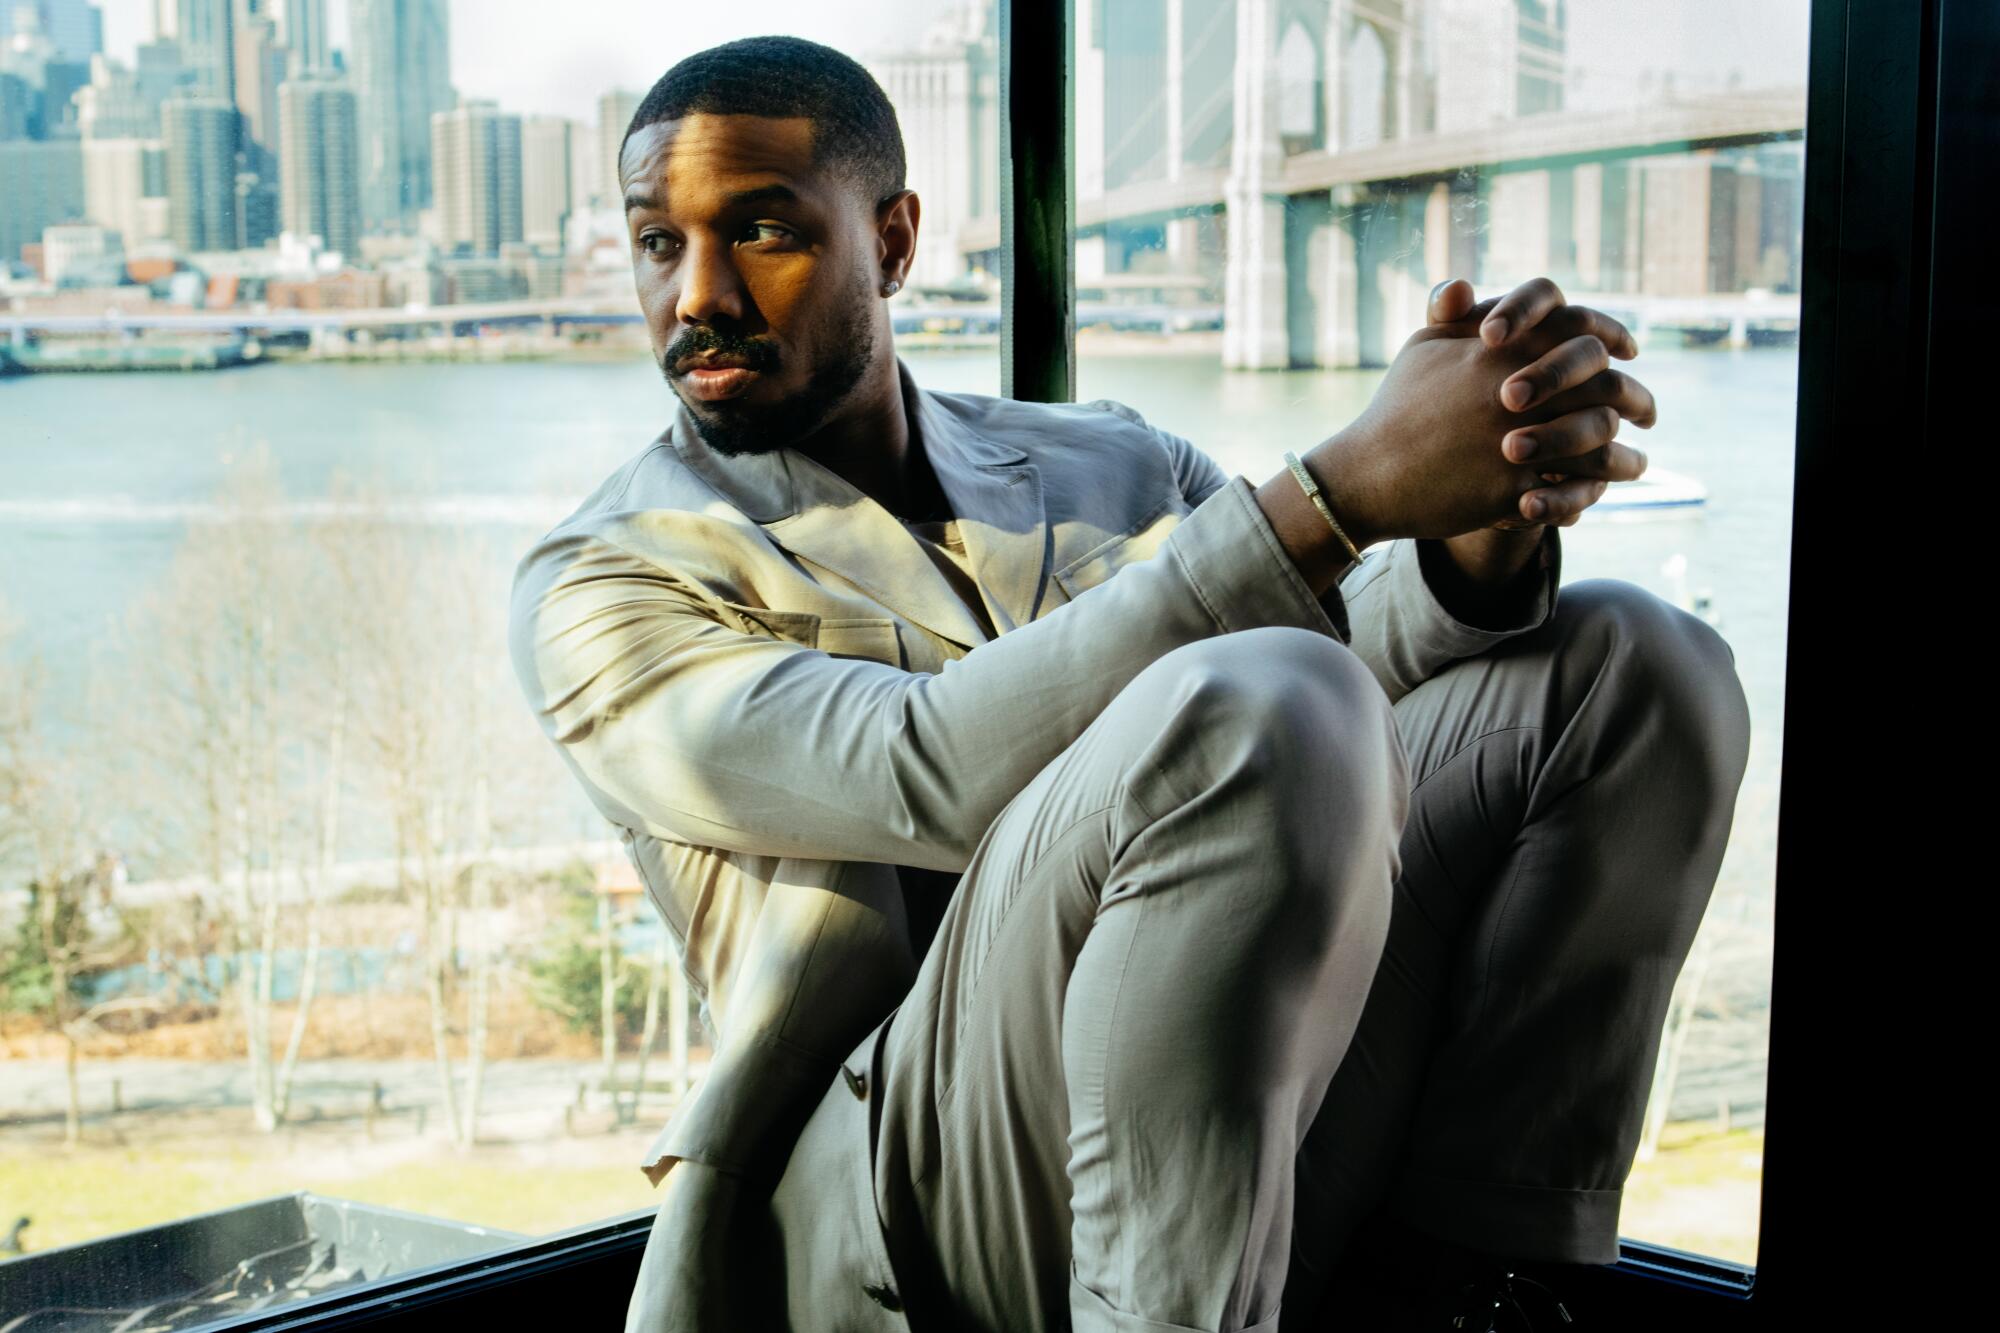 CREED III director and star Michael B. Jordan honored by the